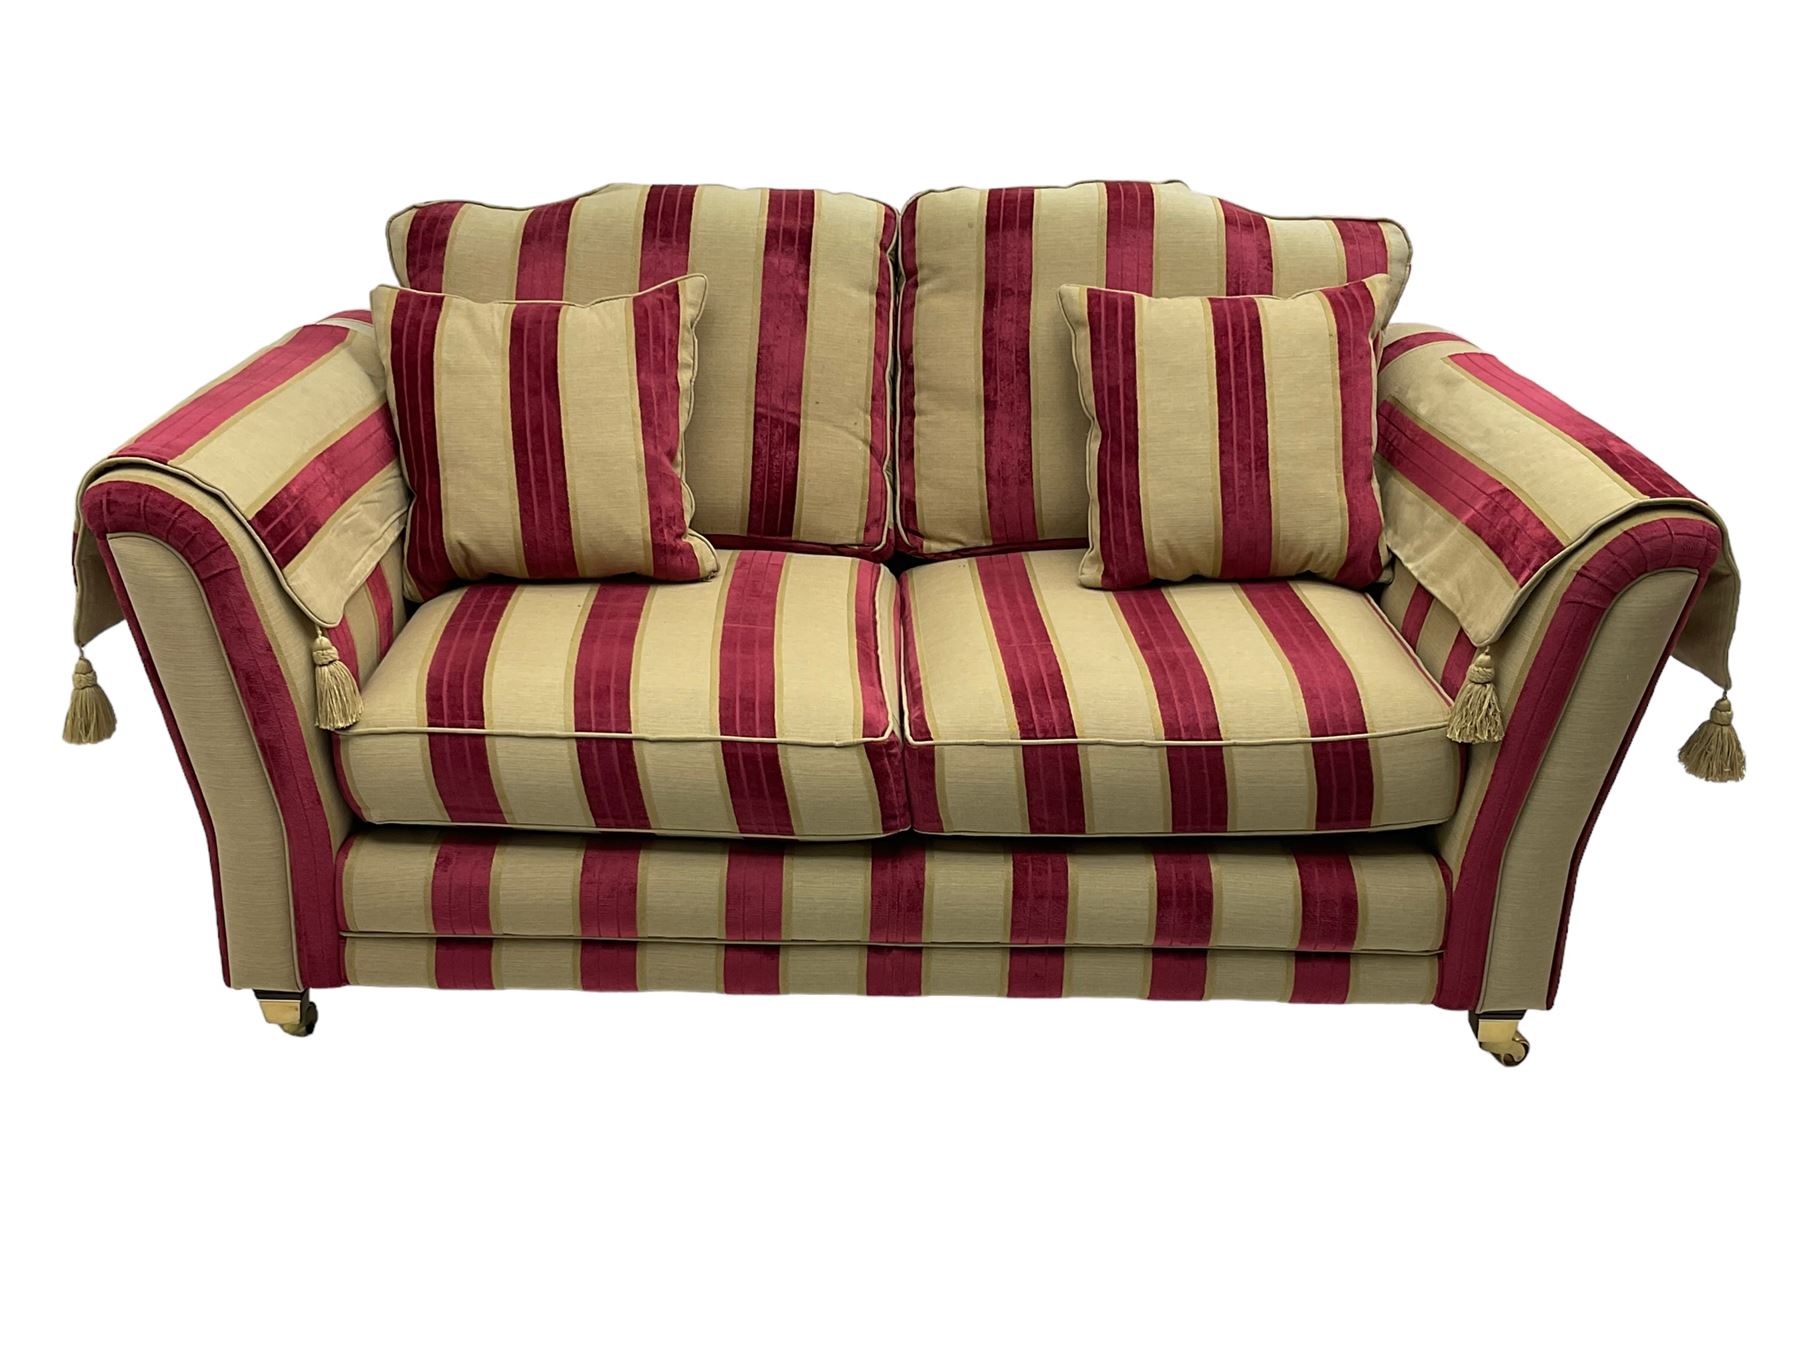 Three-piece lounge suite - large two-seat sofa upholstered in red and gold striped fabric (W185cm - Image 16 of 24